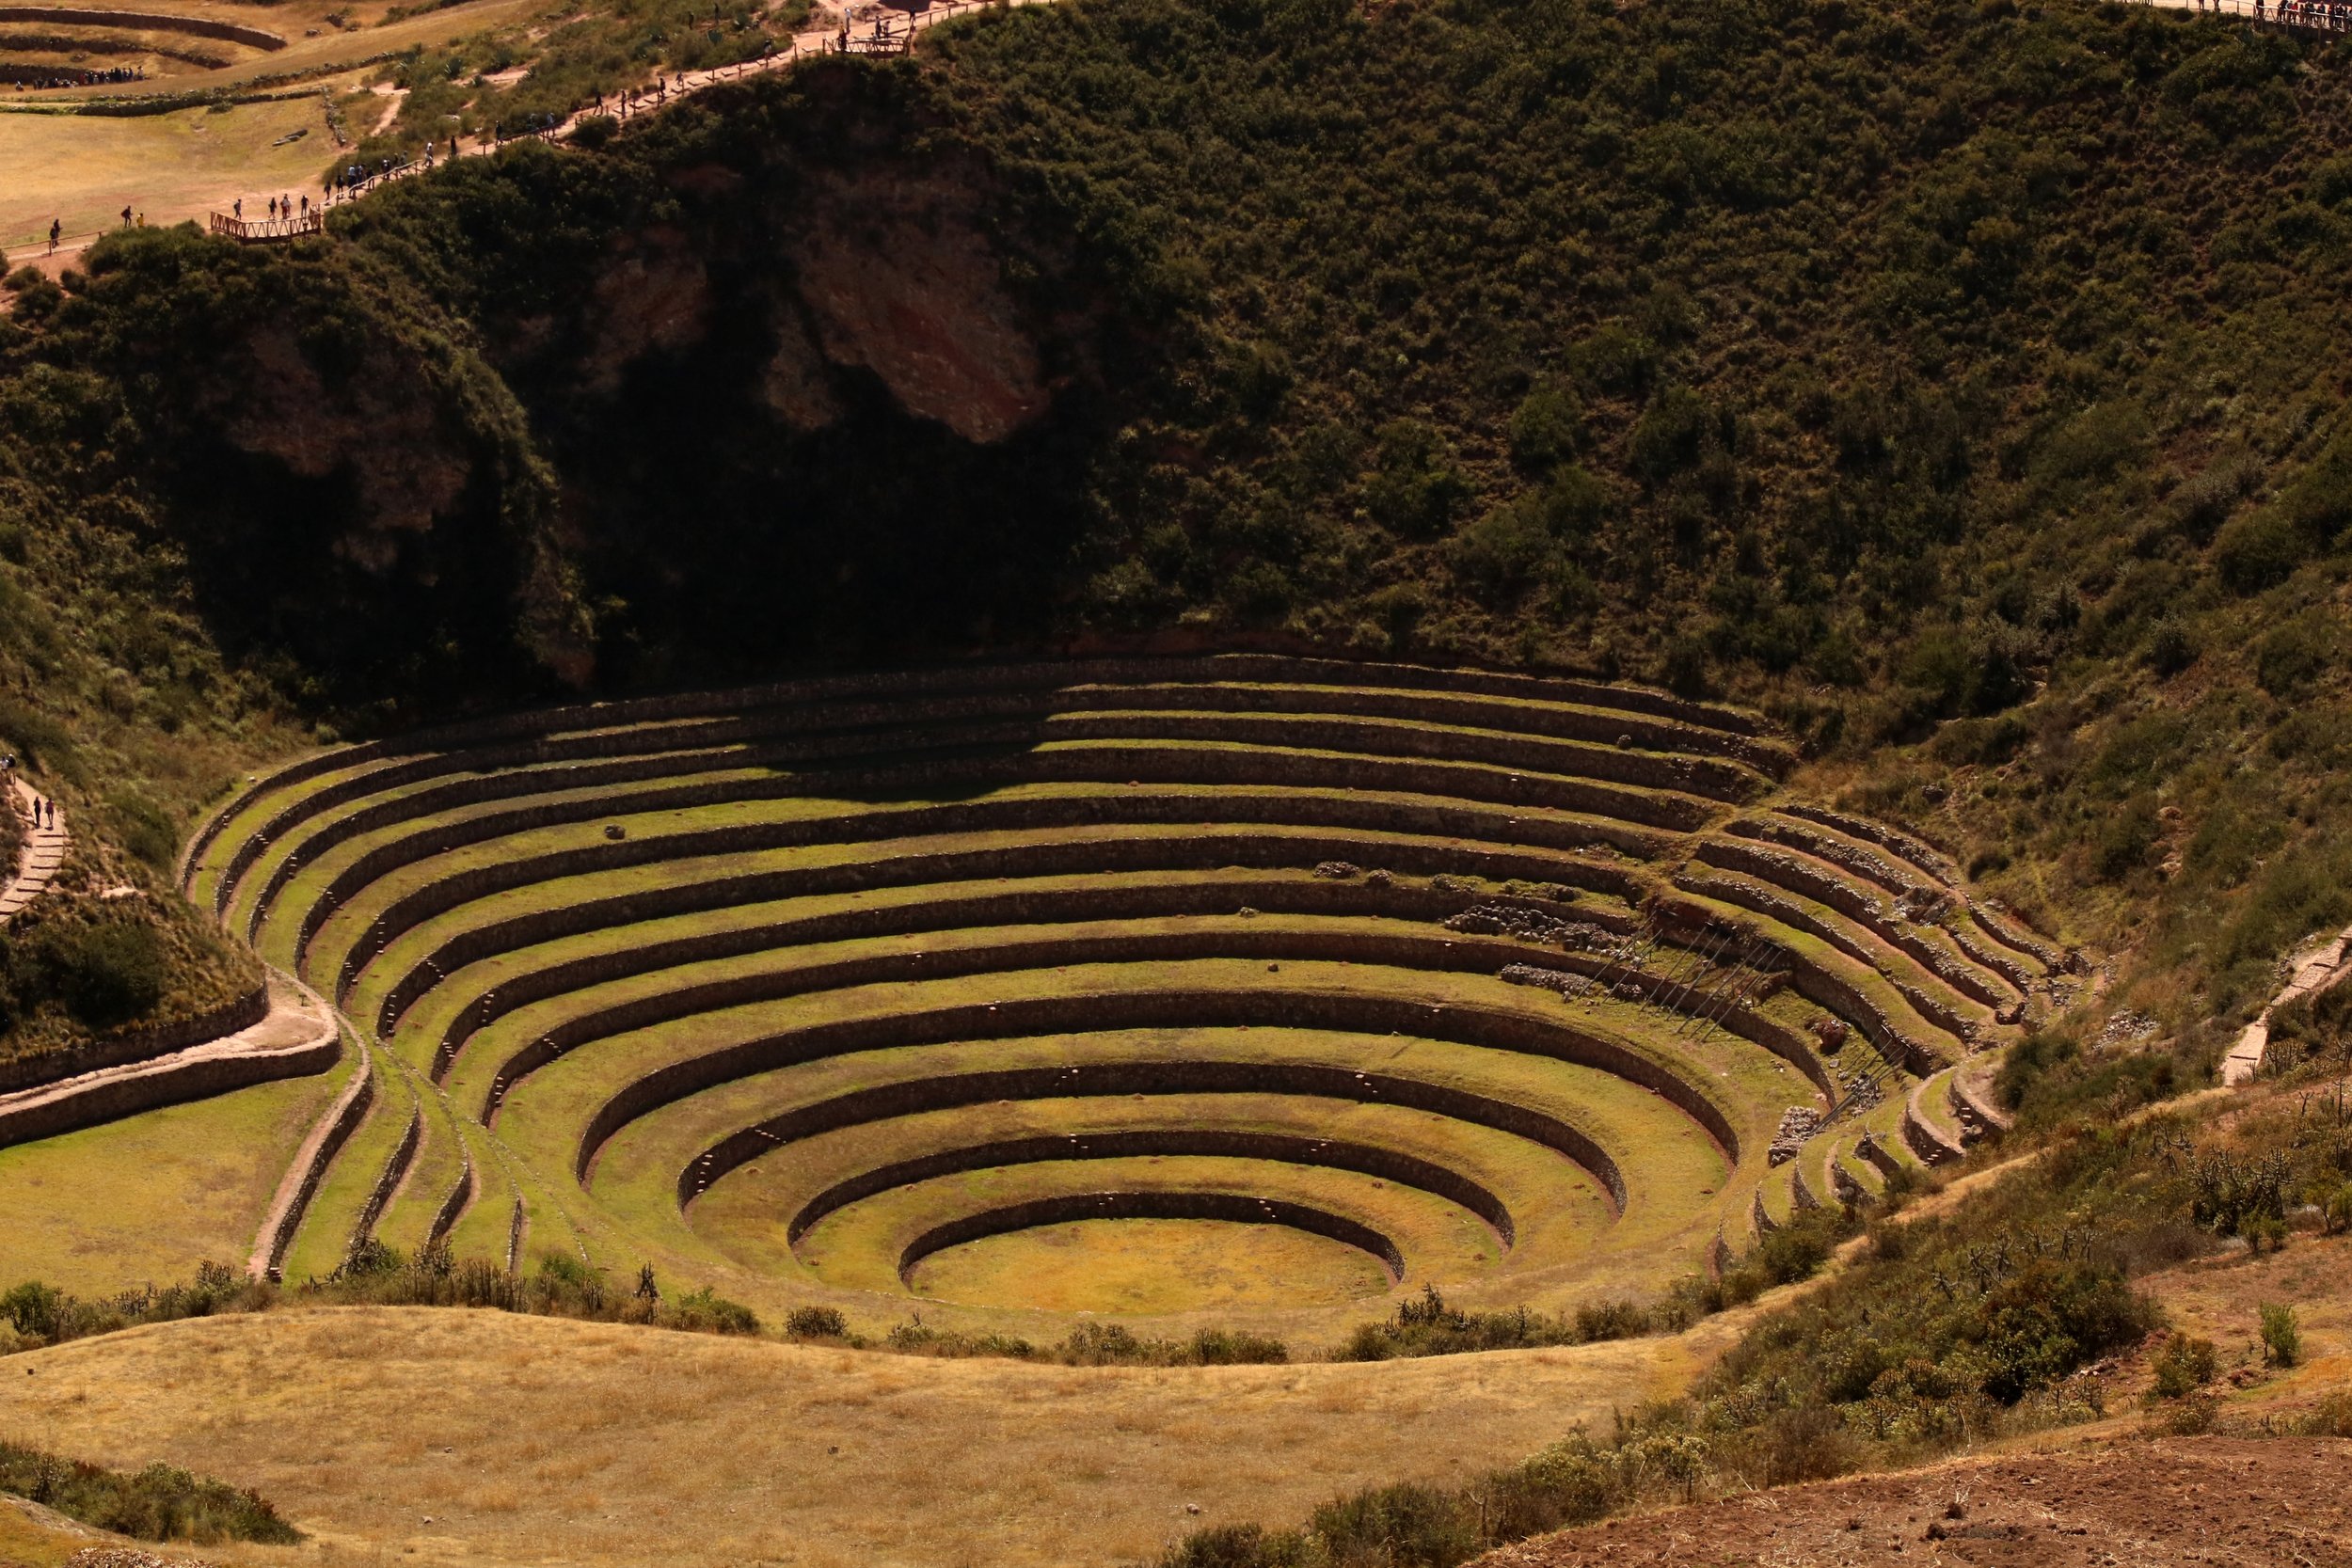 Visit the Pisac ruins in the Sacred Valley